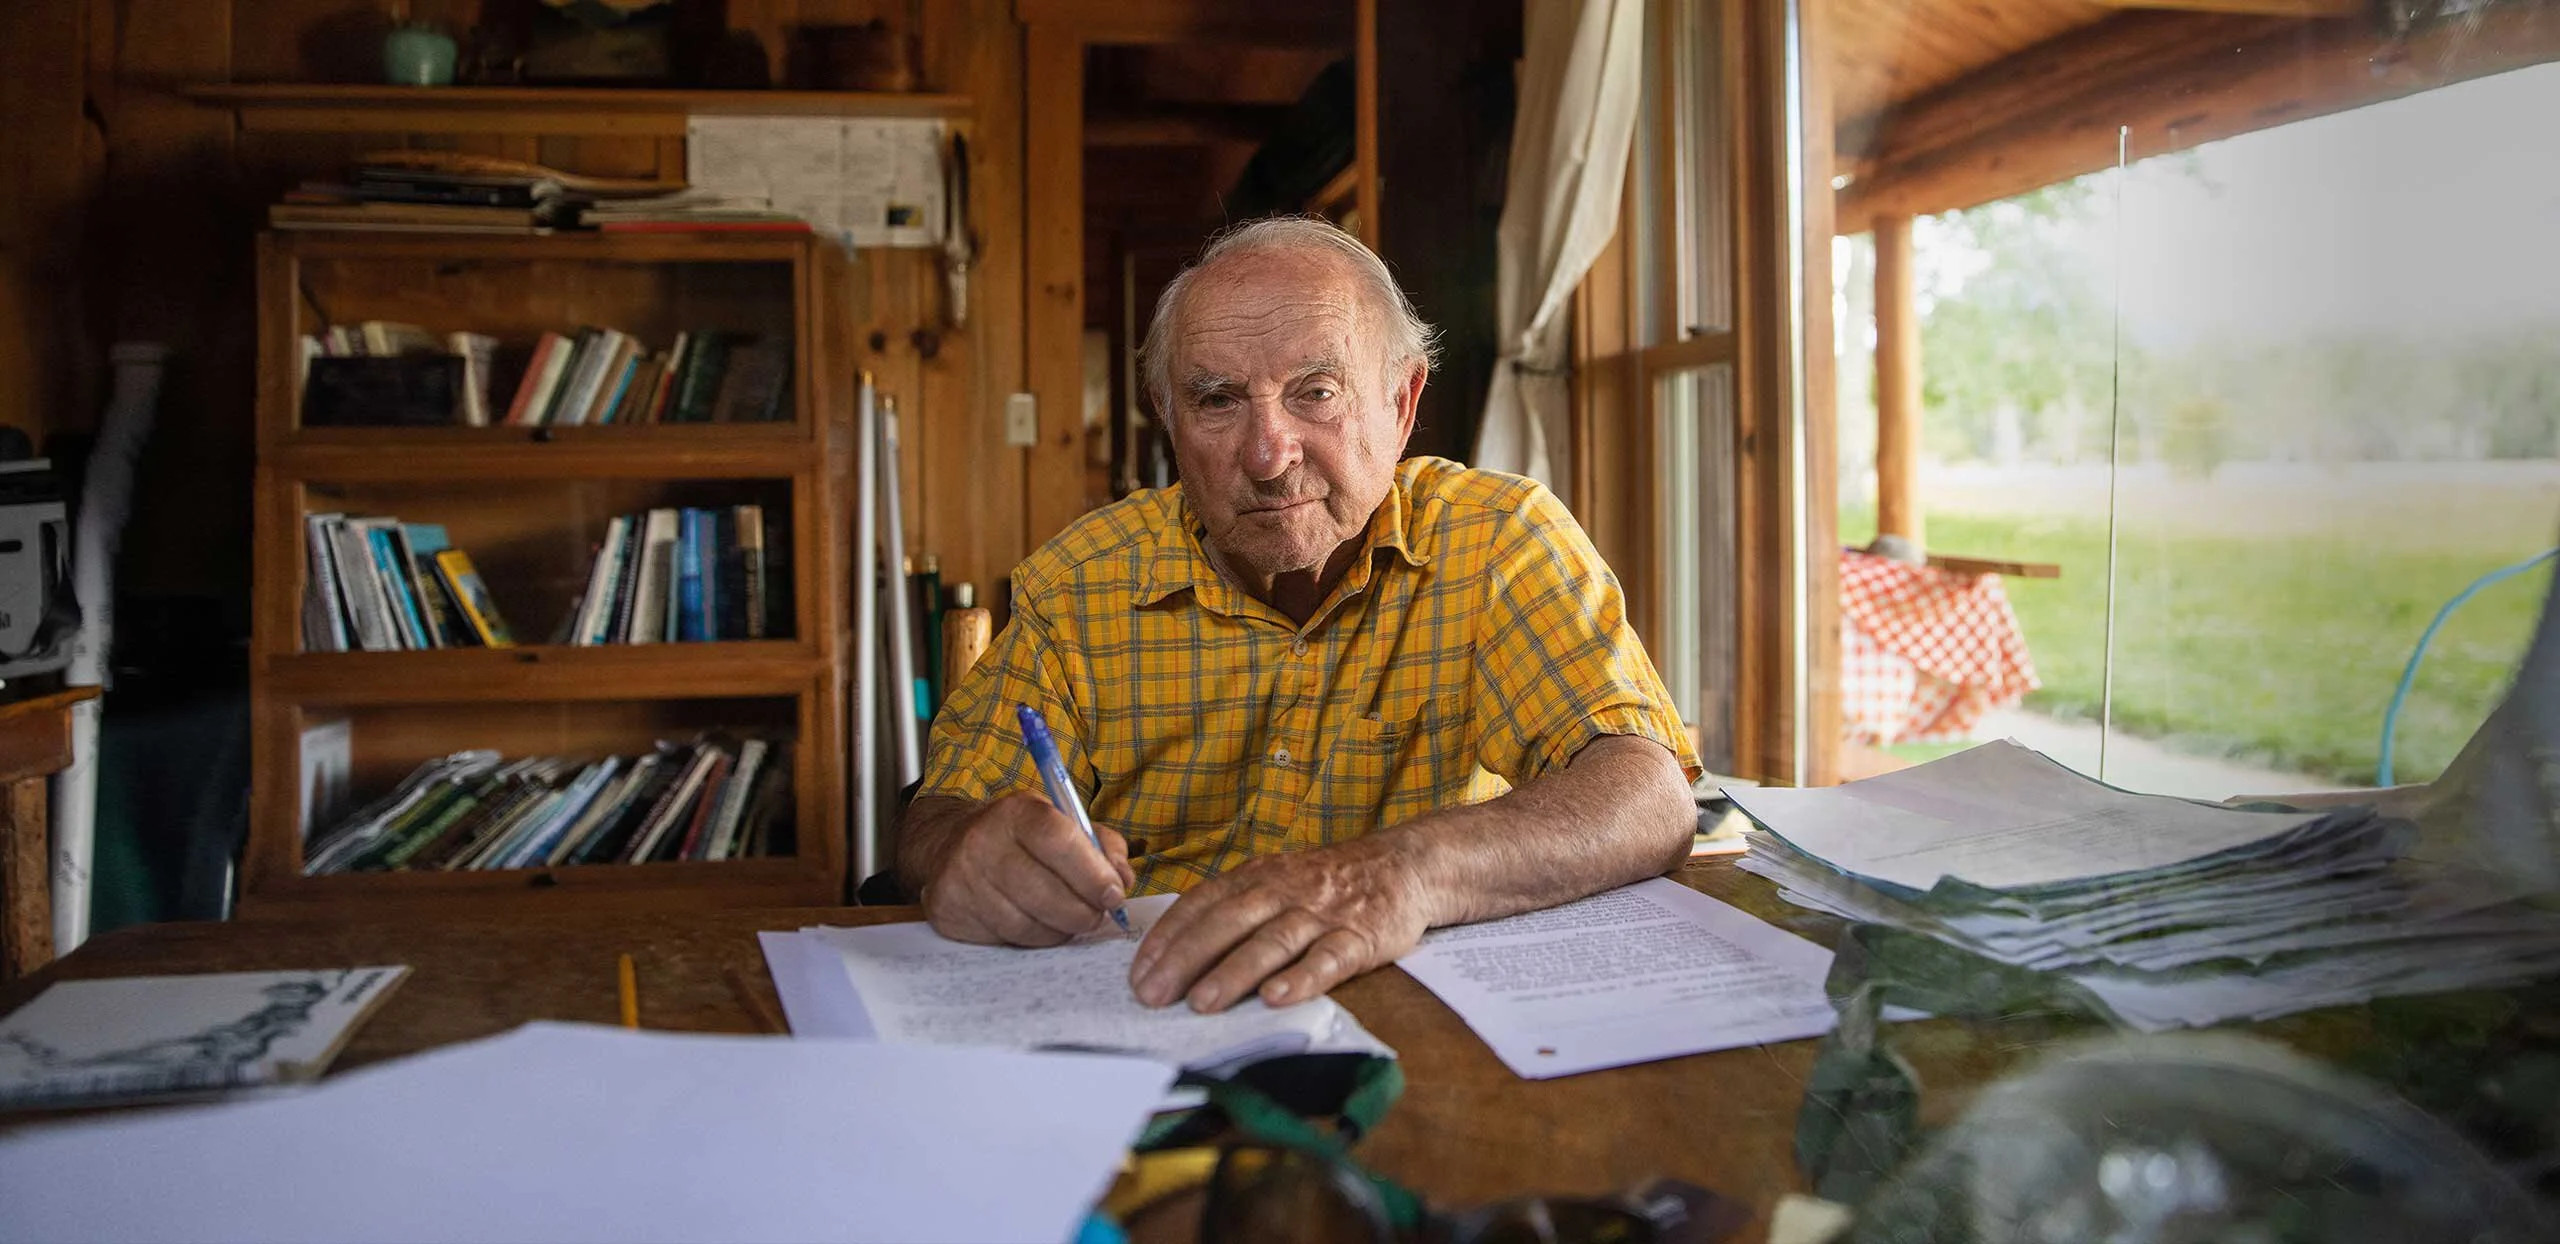 Patagonia's billionaire boss transfers ownership to charitable trusts to fight climate change